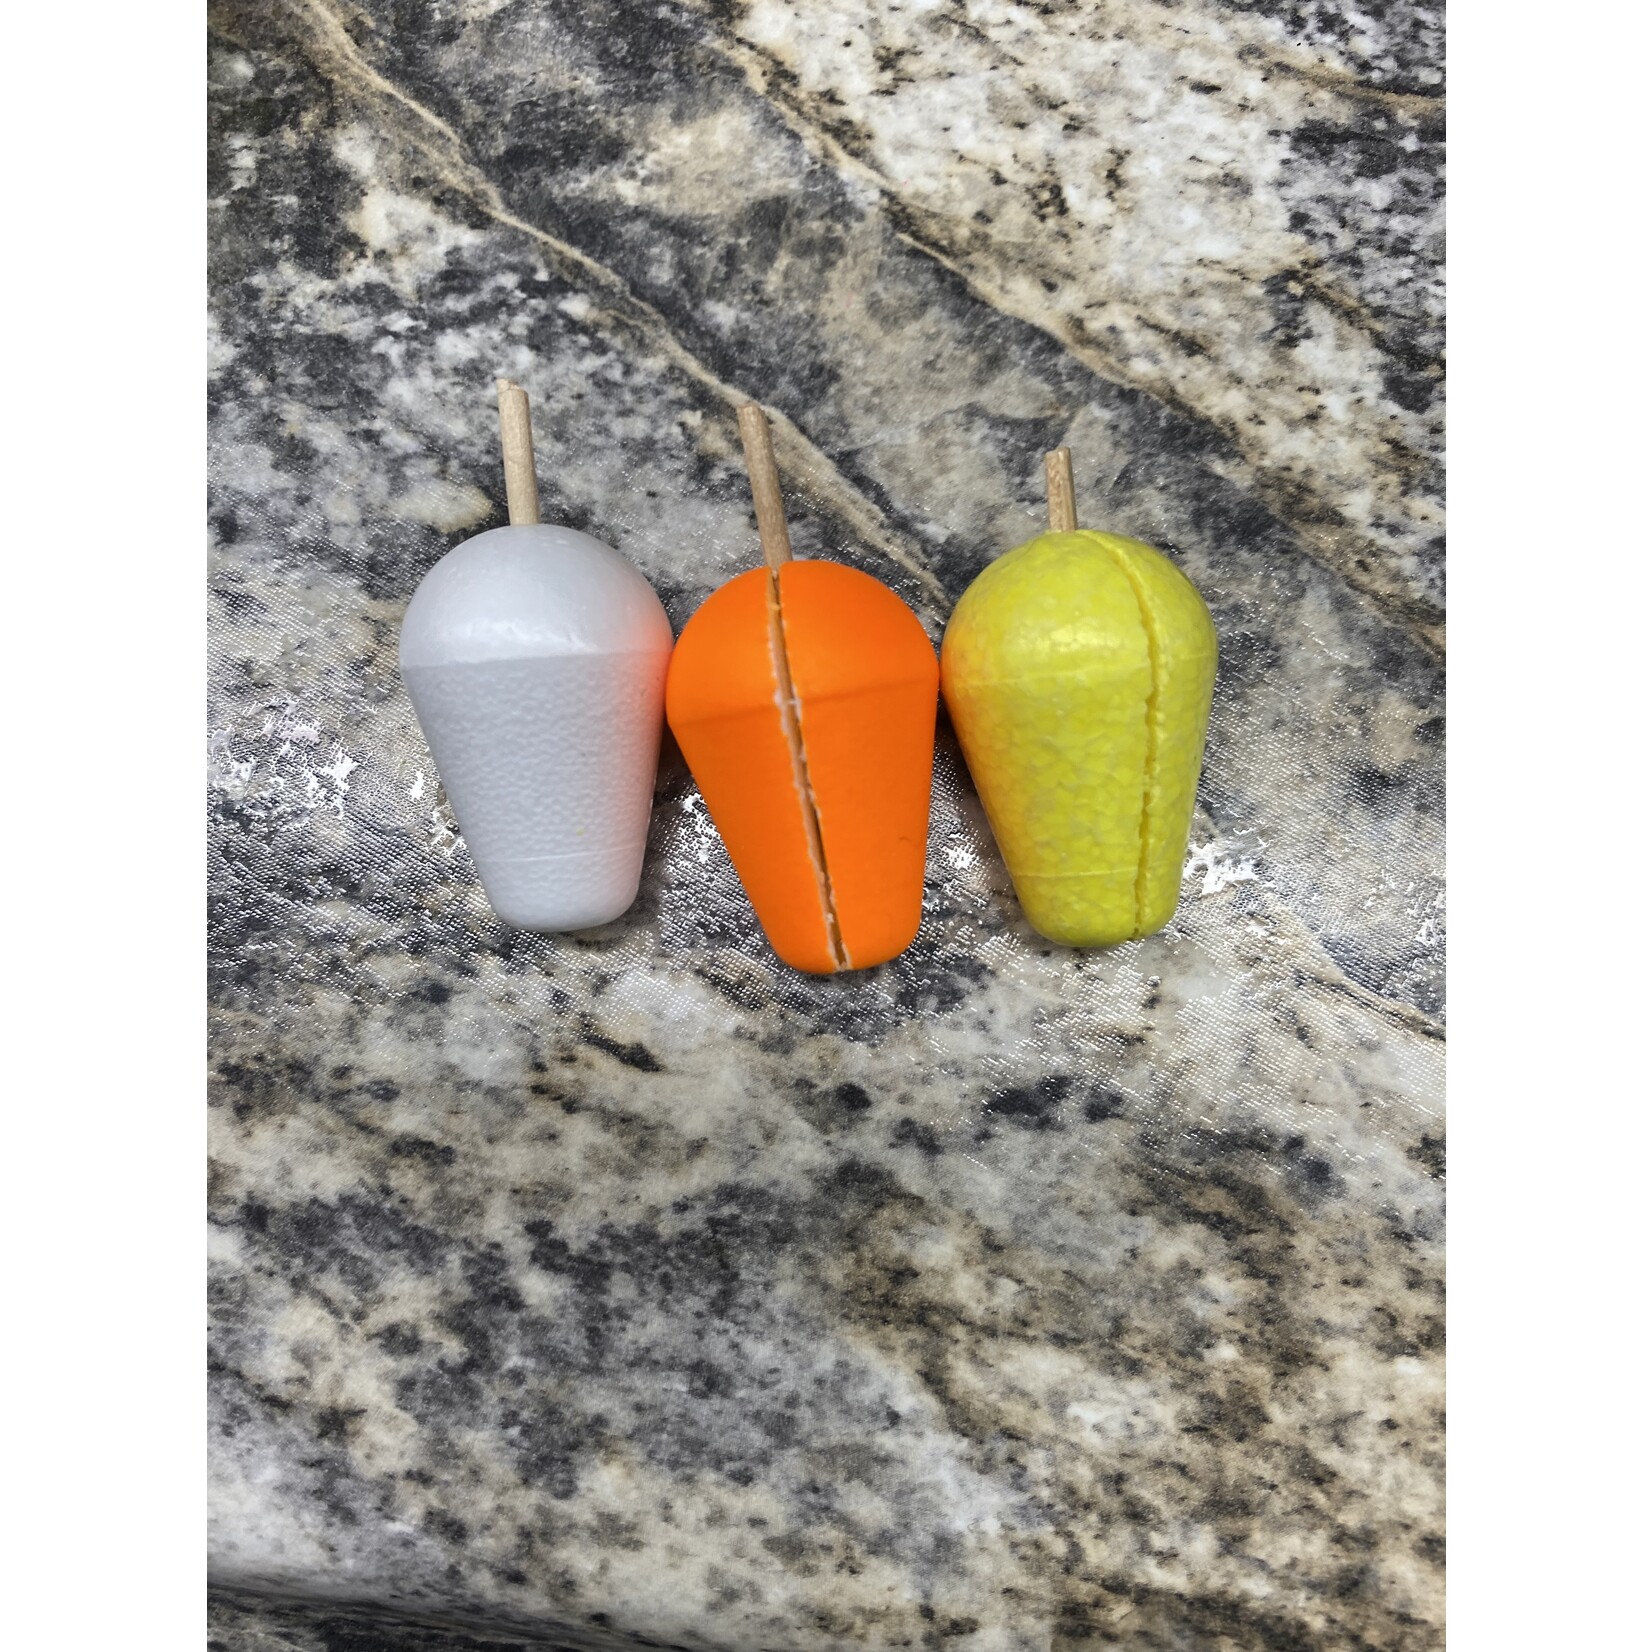 SLITTED TOOTH PICK FLOATS